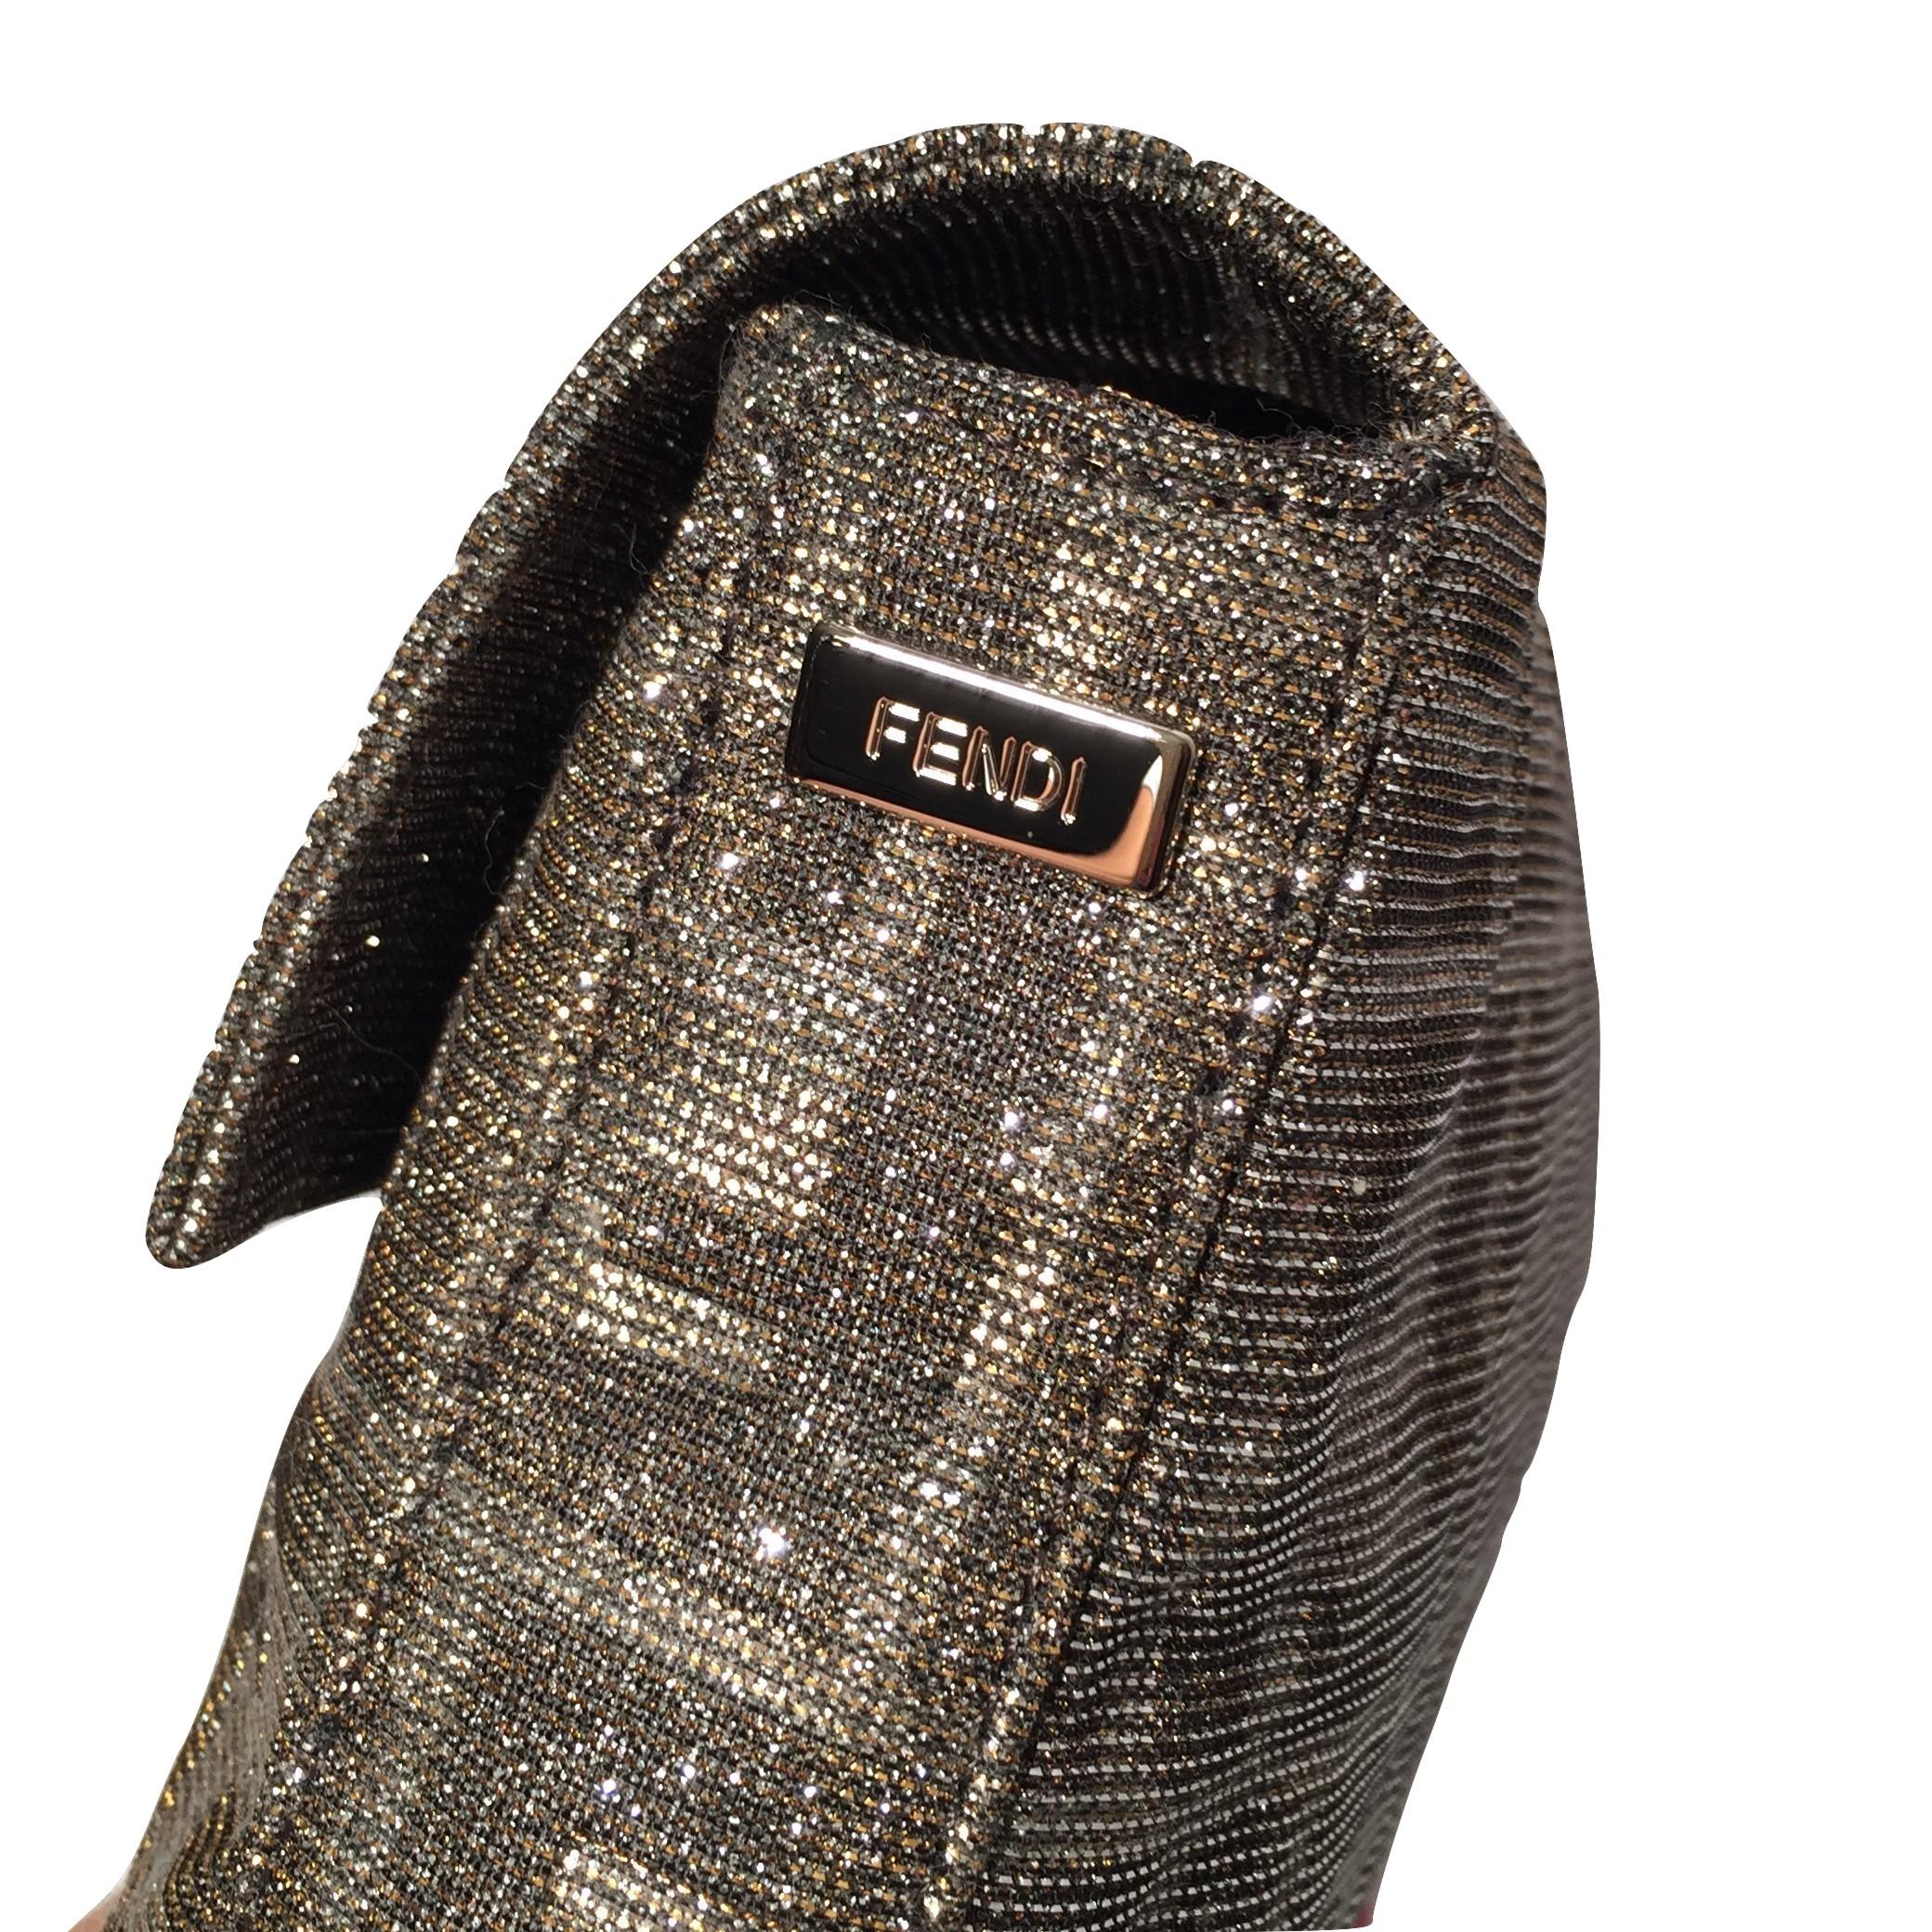 New Fendi Collectors Crystal Baguette Bag Featured in the 15th Anniversary Book 13